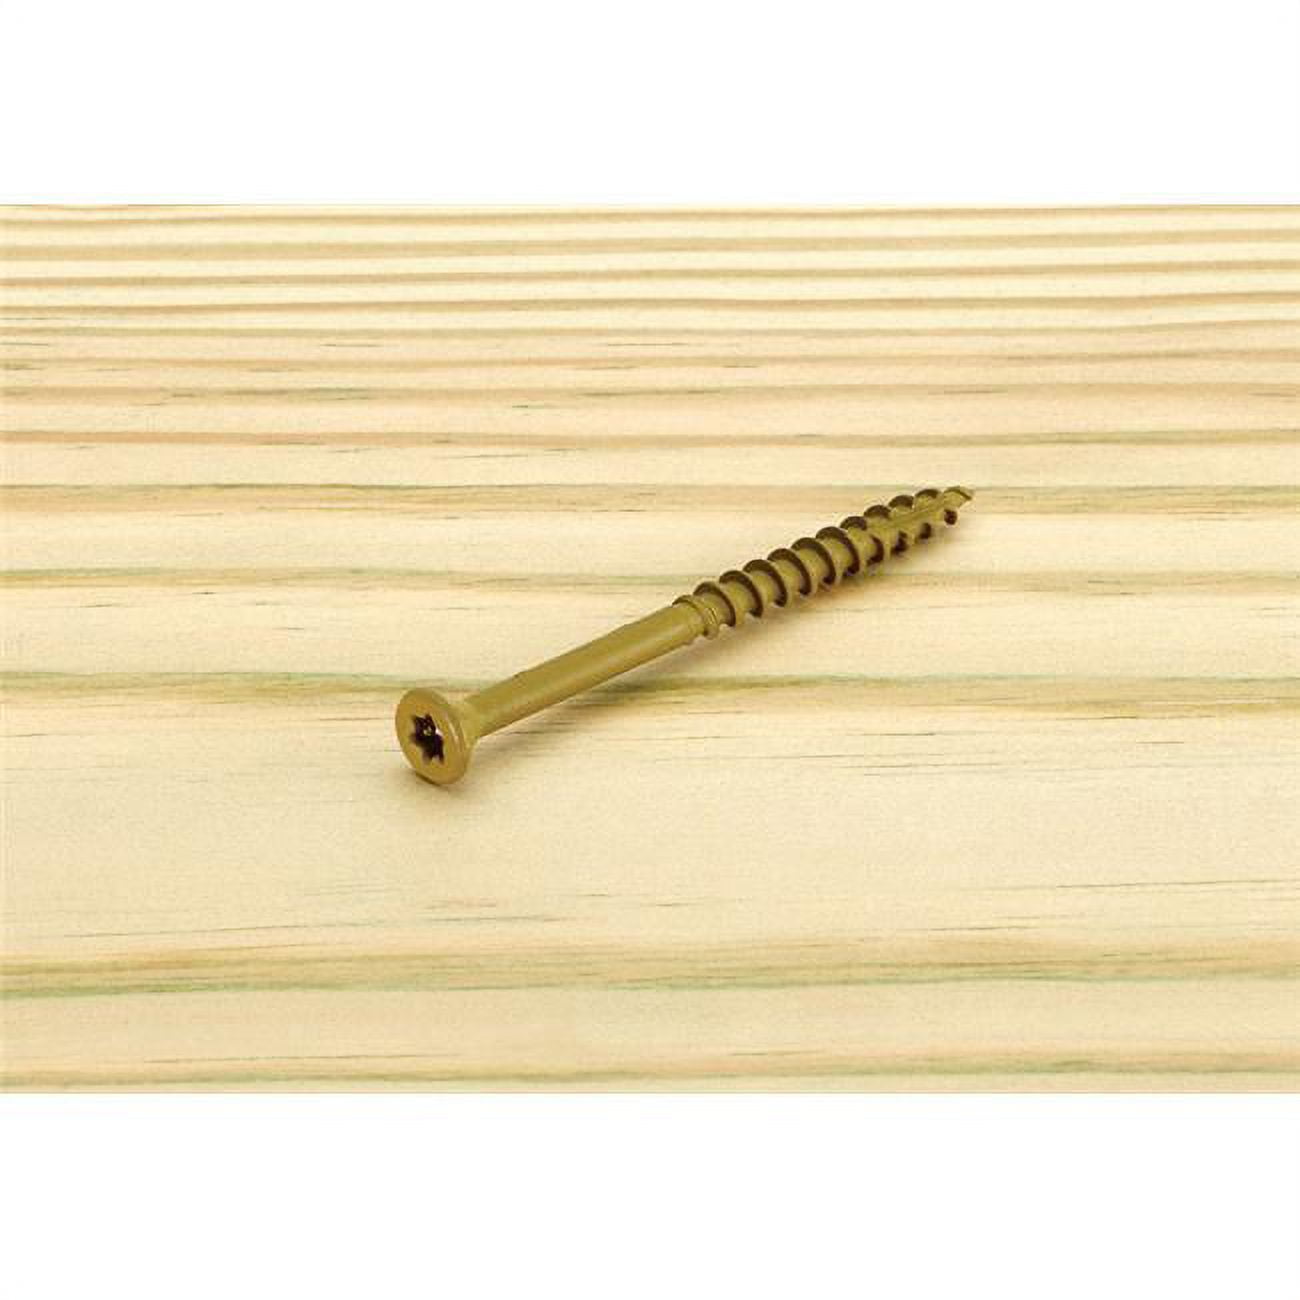 5001351 No.9 X 2.5 In. Star Flat Head Epoxy Coated Carbon Steel Deck Screws, Pack Of 75